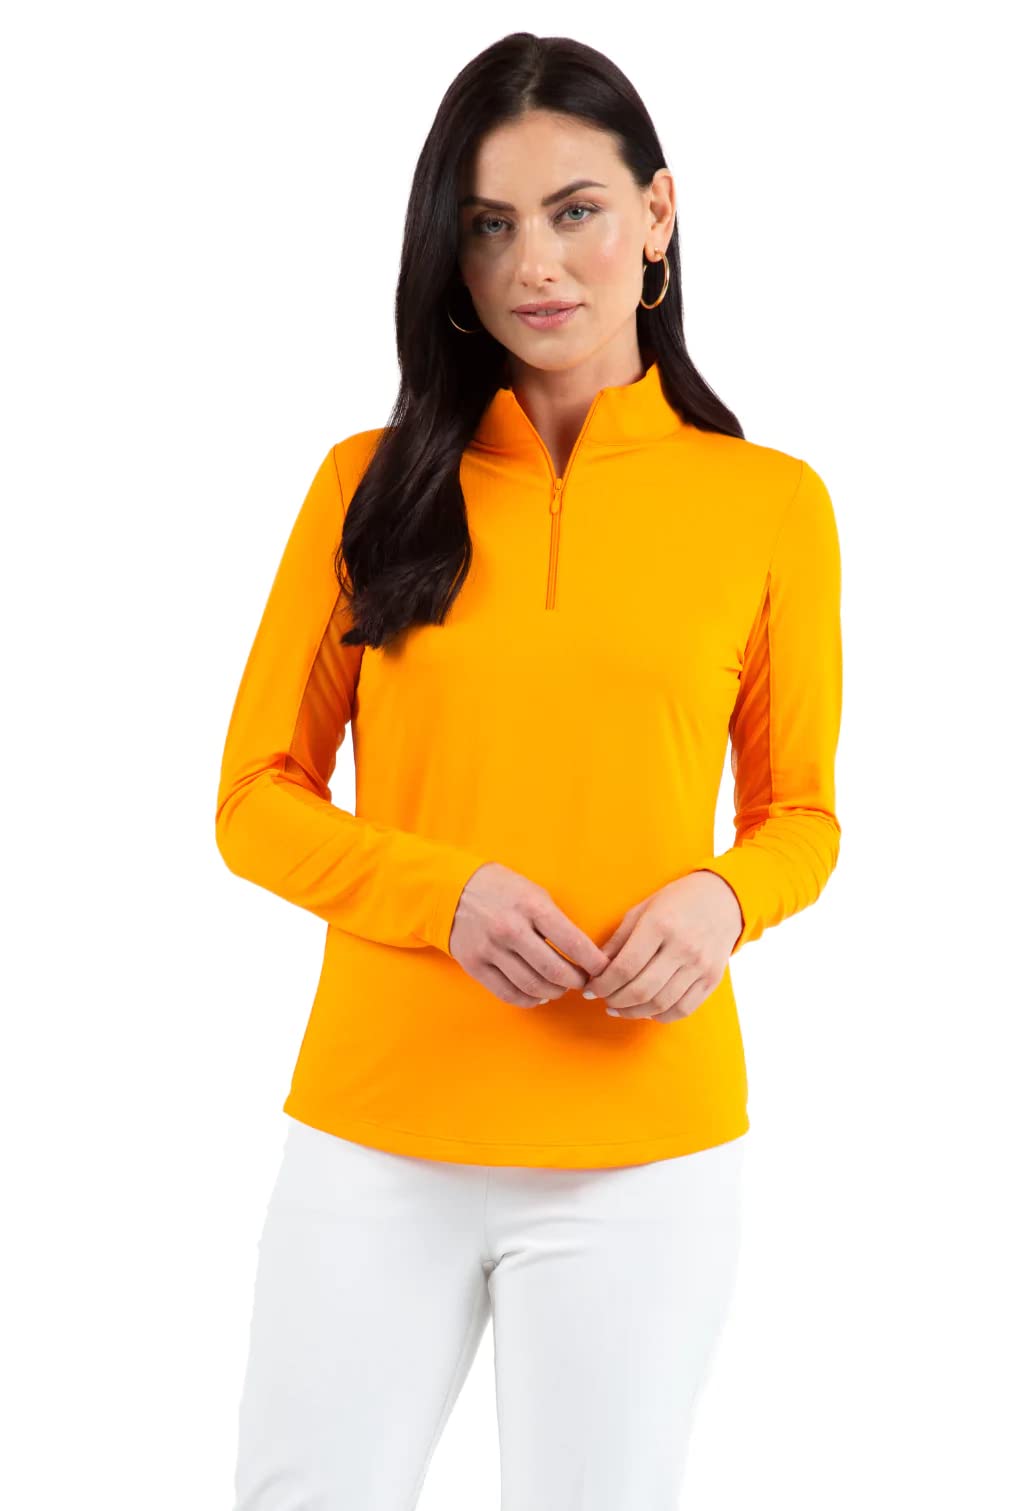 IBKUL Athleisure Wear Sun Protective UPF 50+ Icefil Cooling Tech Long Sleeve Mock Neck Top with Under Arm Mesh 80000 Orange Peel Solid M